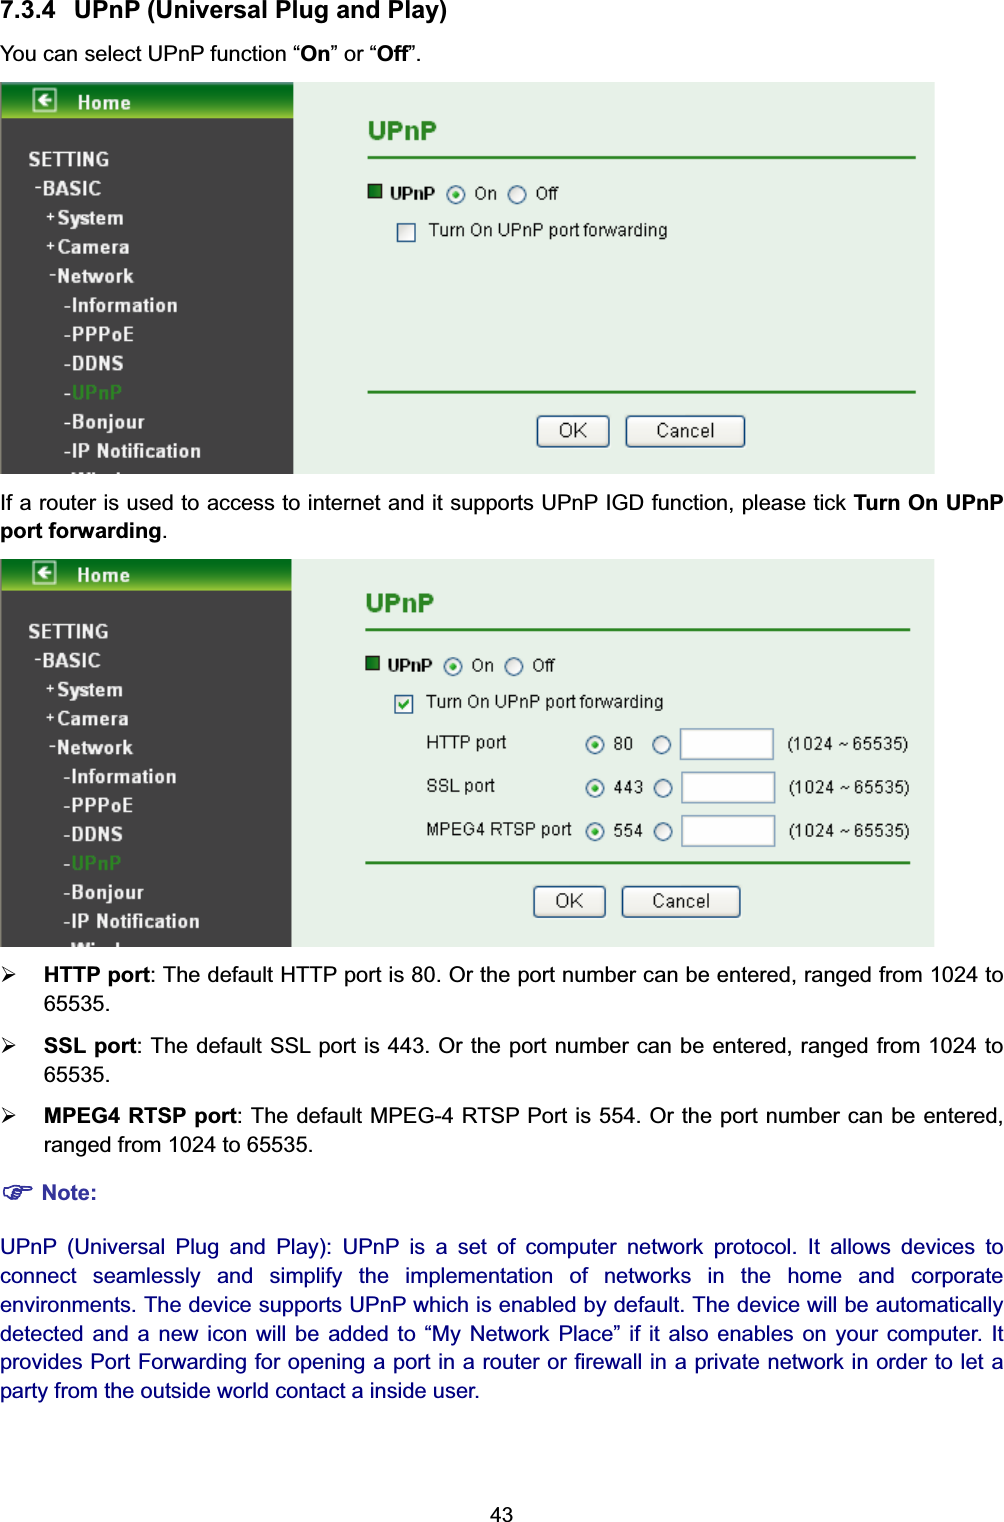  43 7.3.4  UPnP (Universal Plug and Play) You can select UPnP function “On” or “Off”.  If a router is used to access to internet and it supports UPnP IGD function, please tick Turn On UPnP port forwarding.  ¾ HTTP port: The default HTTP port is 80. Or the port number can be entered, ranged from 1024 to 65535.  ¾ SSL port: The default SSL port is 443. Or the port number can be entered, ranged from 1024 to 65535.  ¾ MPEG4 RTSP port: The default MPEG-4 RTSP Port is 554. Or the port number can be entered, ranged from 1024 to 65535.   ) Note: UPnP (Universal Plug and Play): UPnP is a set of computer network protocol. It allows devices to connect seamlessly and simplify the implementation of networks in the home and corporate environments. The device supports UPnP which is enabled by default. The device will be automatically detected and a new icon will be added to “My Network Place” if it also enables on your computer. It  provides Port Forwarding for opening a port in a router or firewall in a private network in order to let a party from the outside world contact a inside user. 